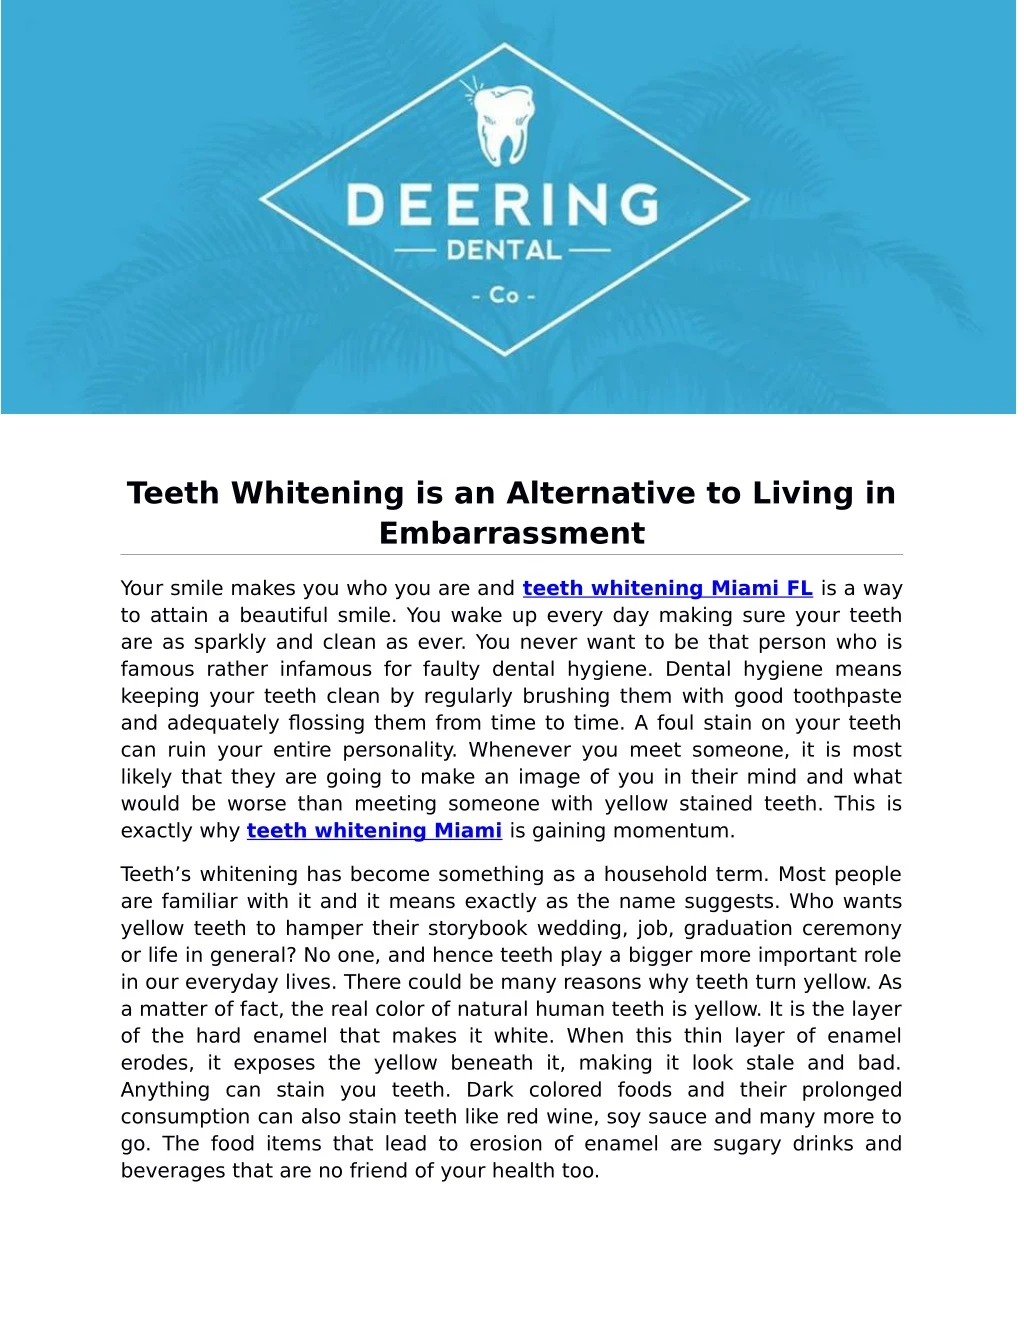 teeth whitening is an alternative to living